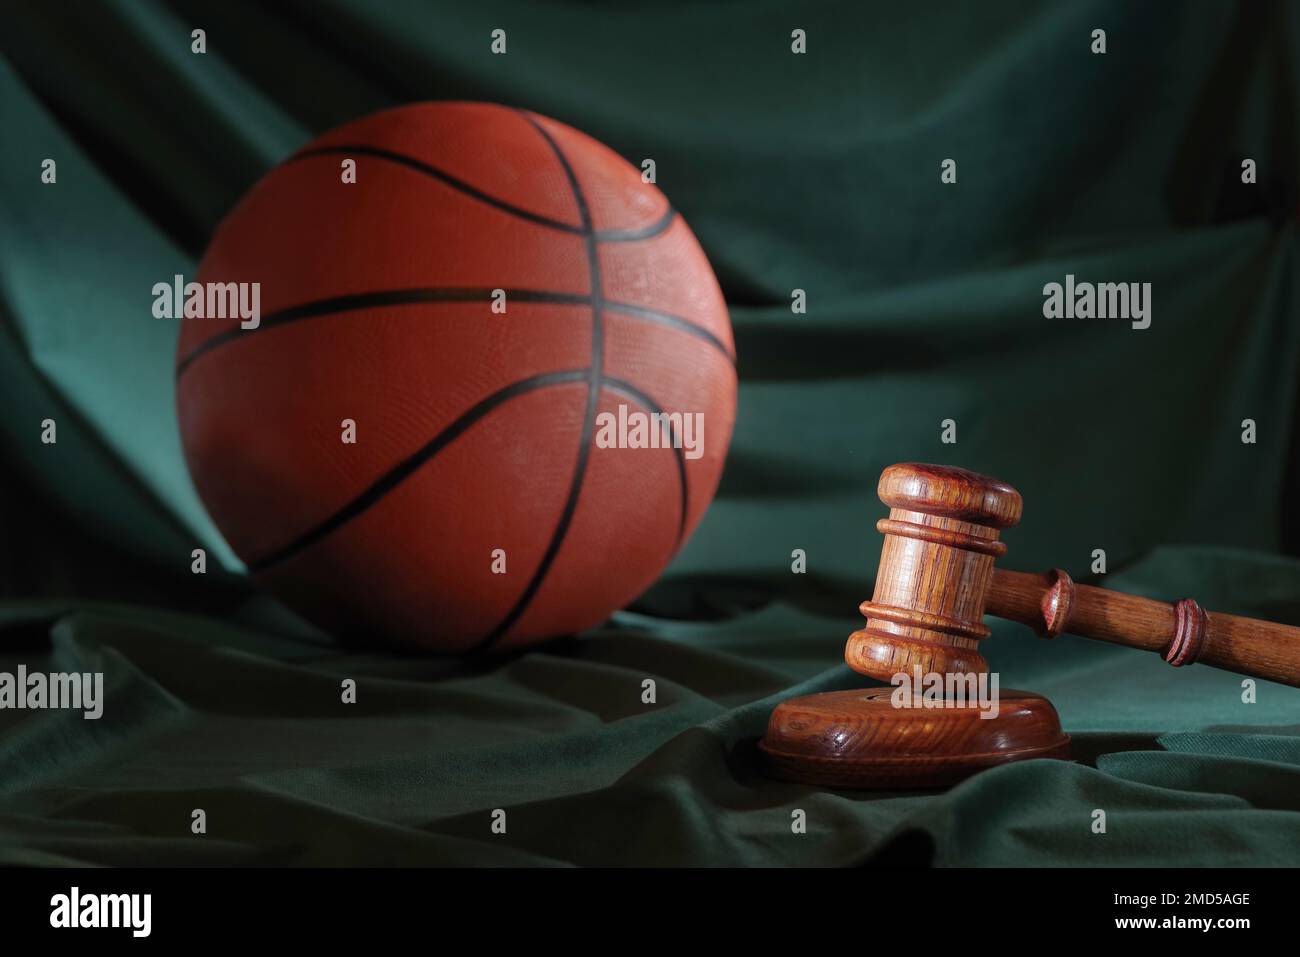 Sport and justice. Wooden judge gavel and basketball Stock Photo